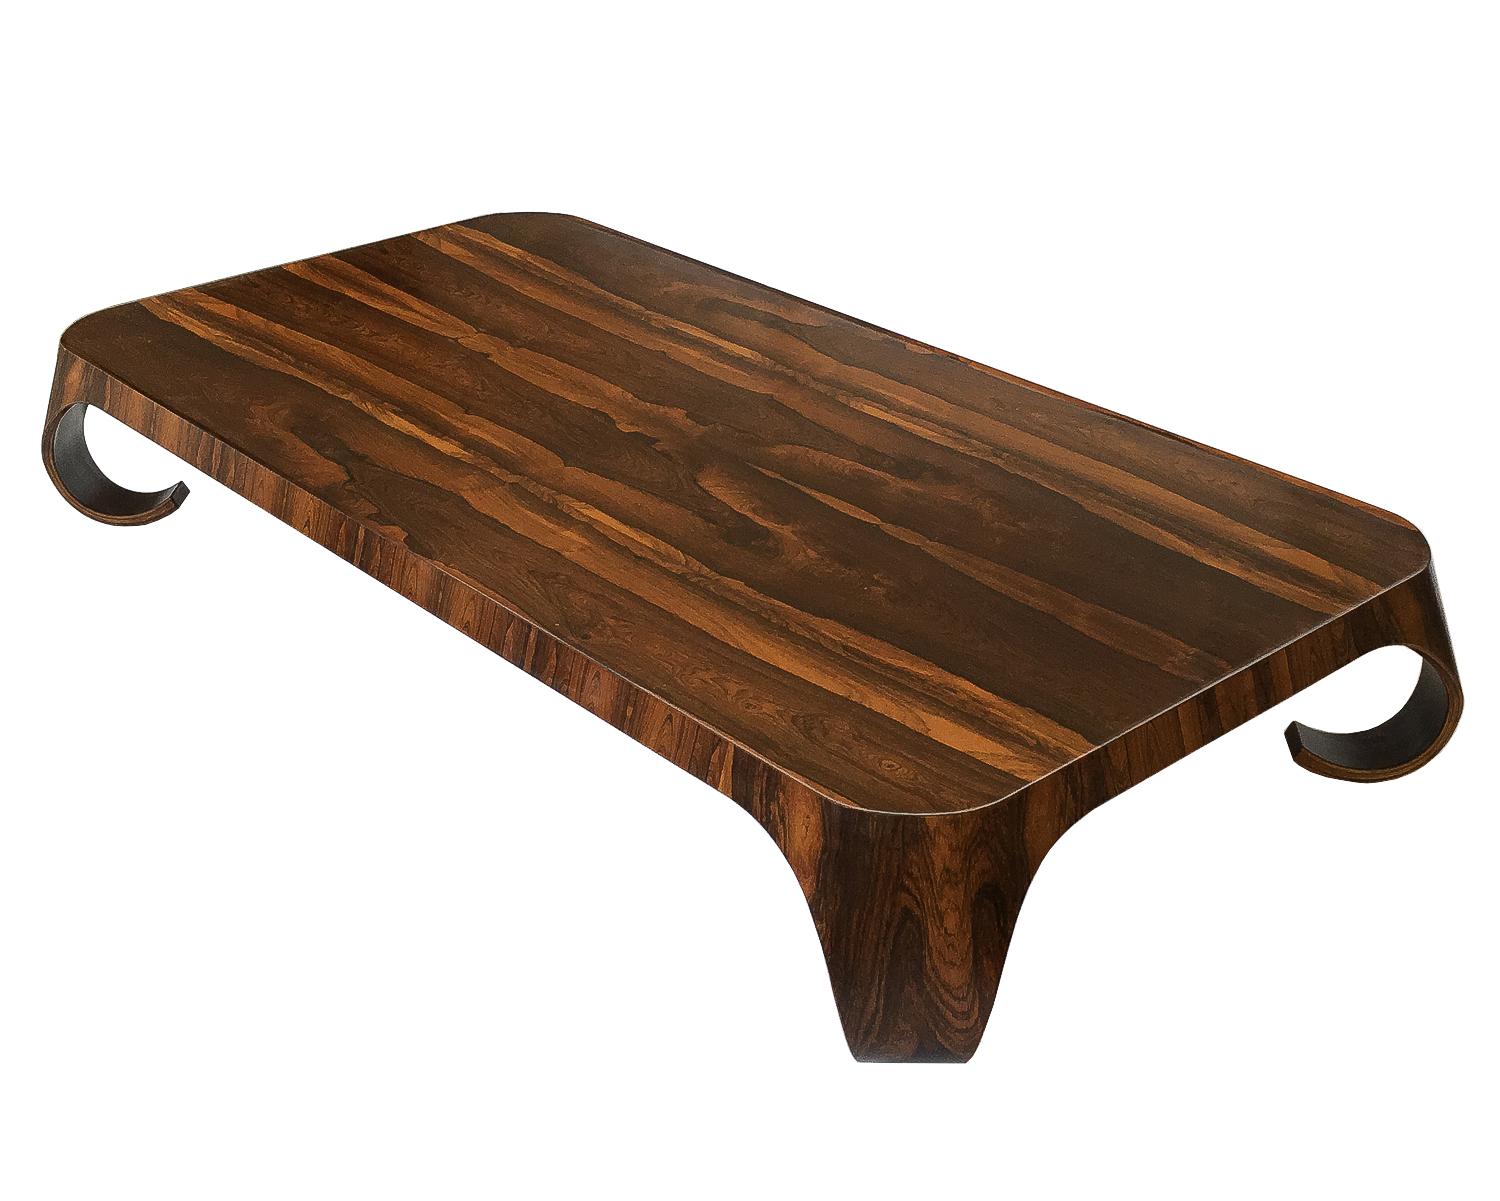 Isamu Kenmochi Brazilian rosewood coffee table for Tendo Mokko, circa 1965. This large, expansive coffee table was custom ordered as it is longer and lower than the standard table and measures 75